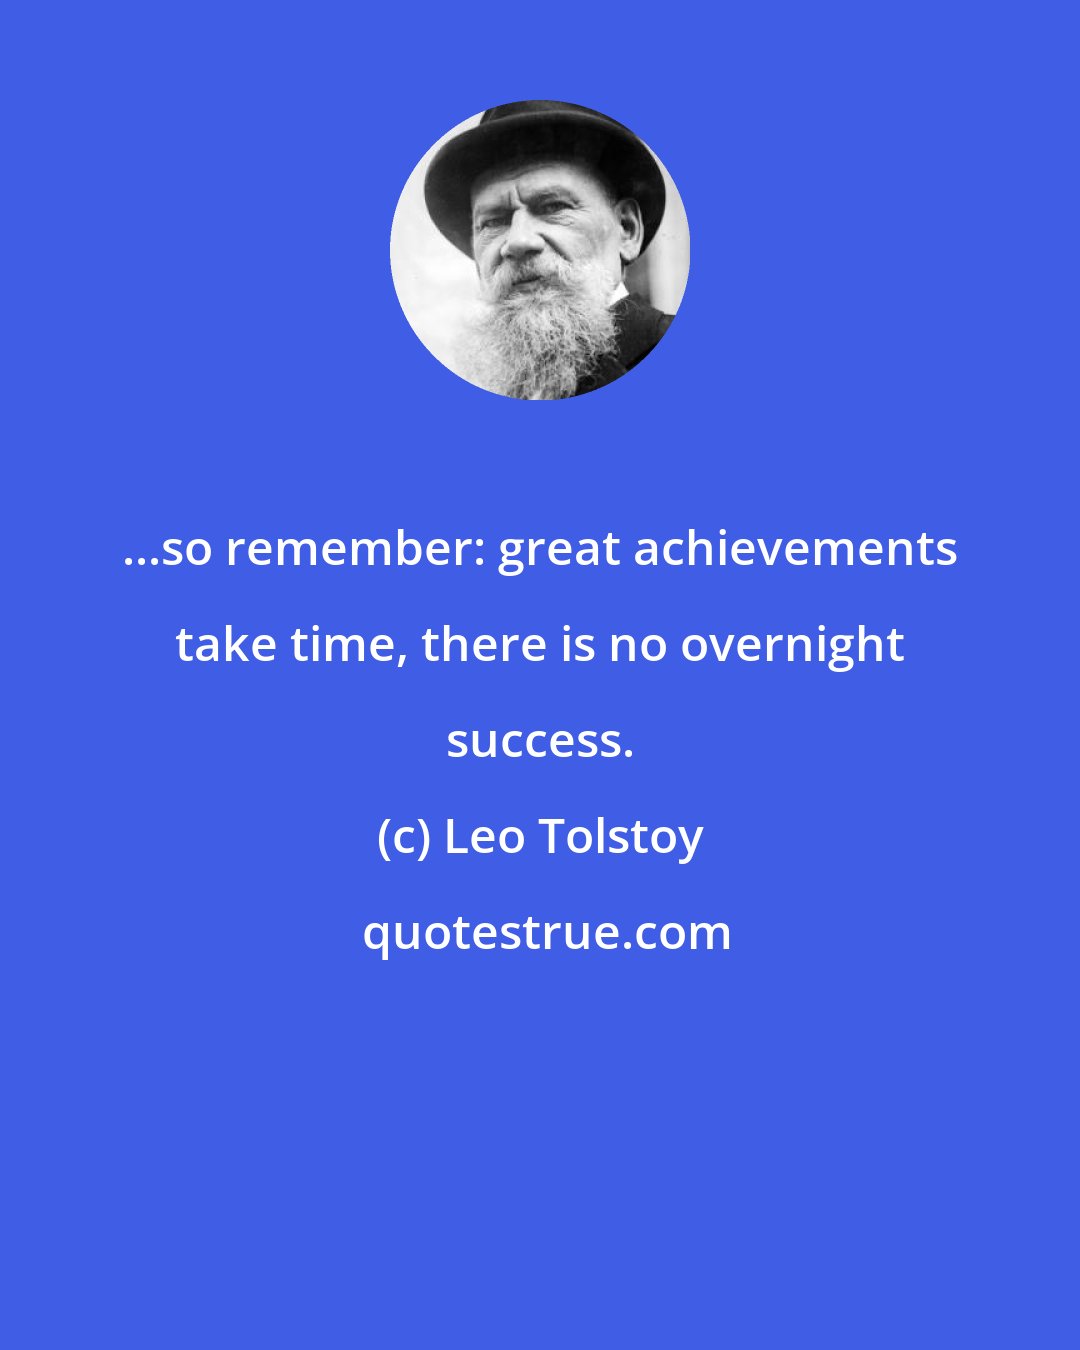 Leo Tolstoy: ...so remember: great achievements take time, there is no overnight success.